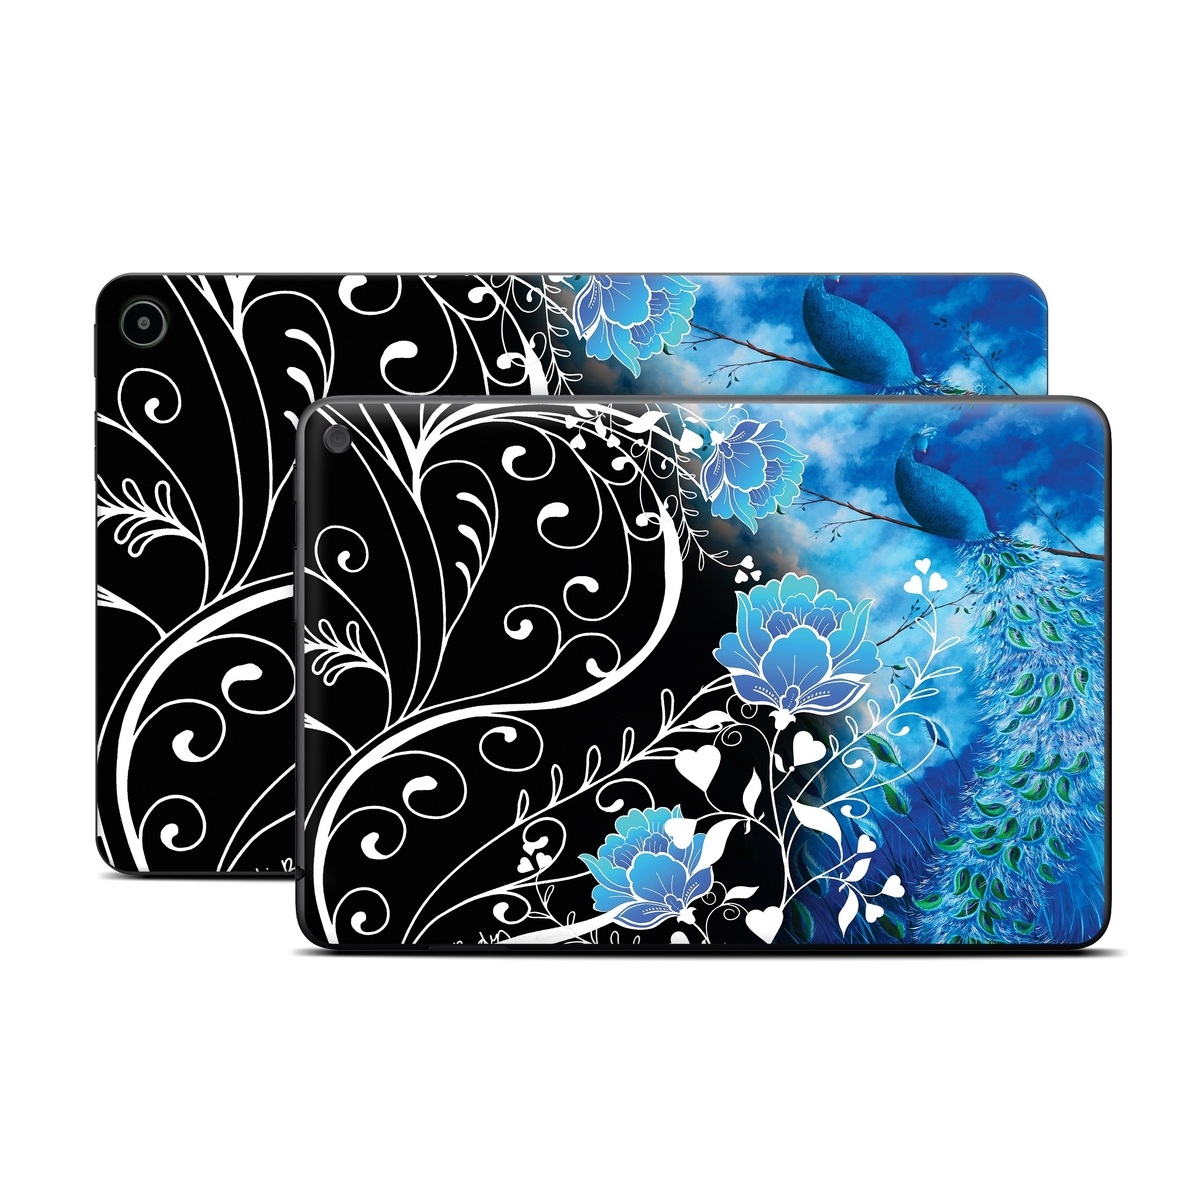 Amazon Fire Tablet Series Skin Skin design of Blue, Pattern, Graphic design, Design, Illustration, Organism, Visual arts, Graphics, Plant, Art, with black, blue, gray, white colors